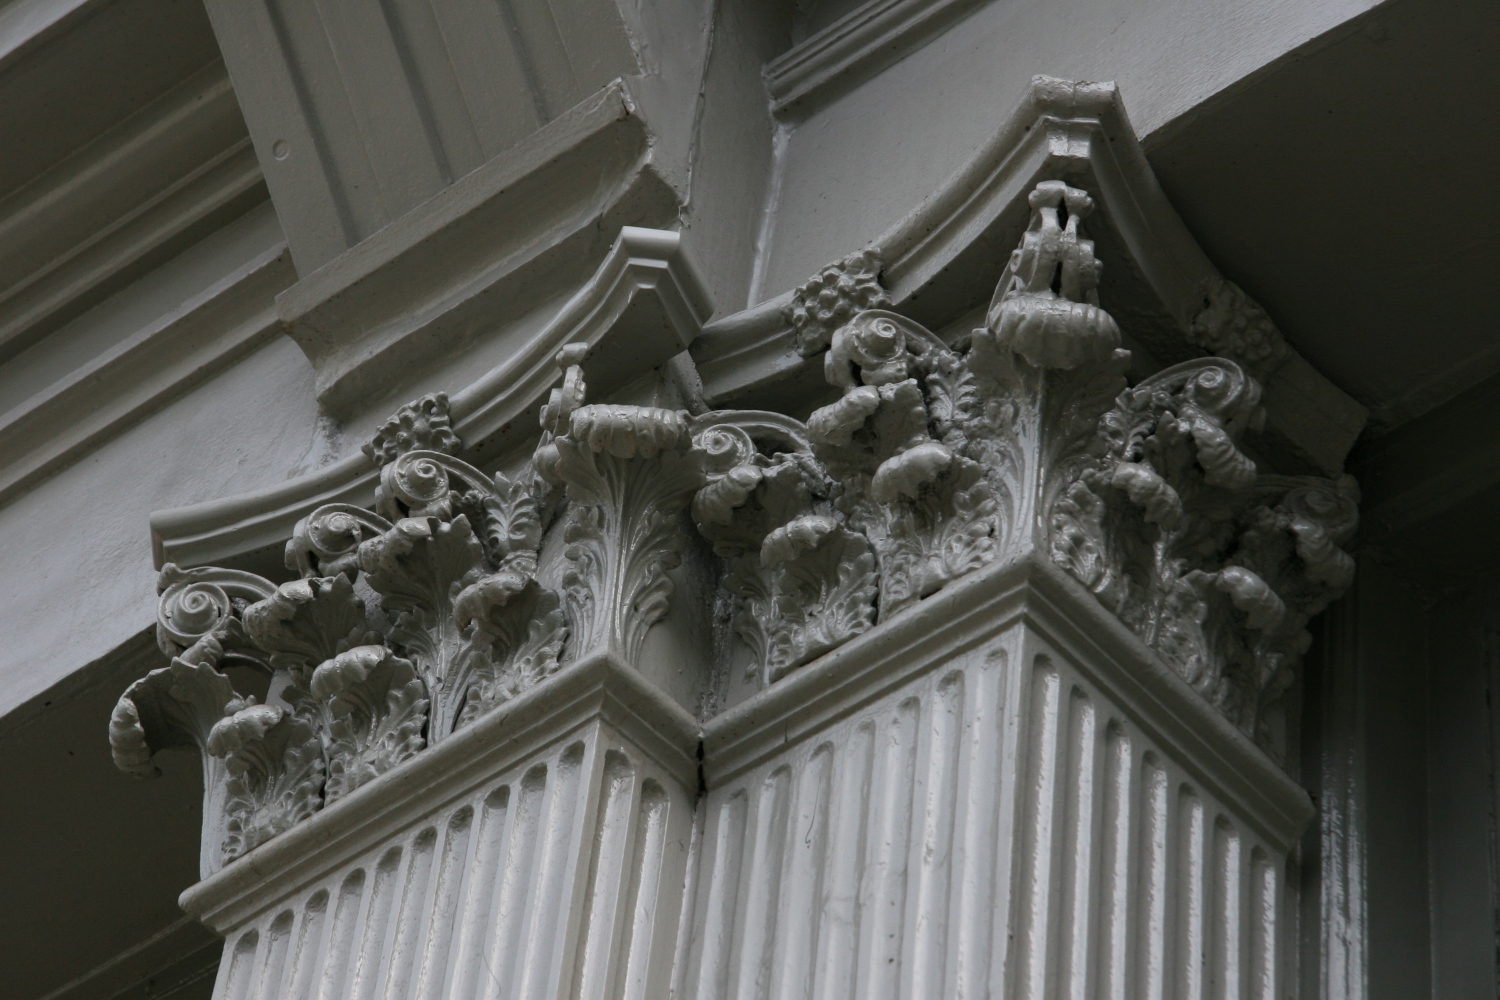 Detailed image of a decorative column element from a historic Manhattan building, demonstrating Jepol Construction's skilled metal restoration and commitment to preserving architectural heritage.